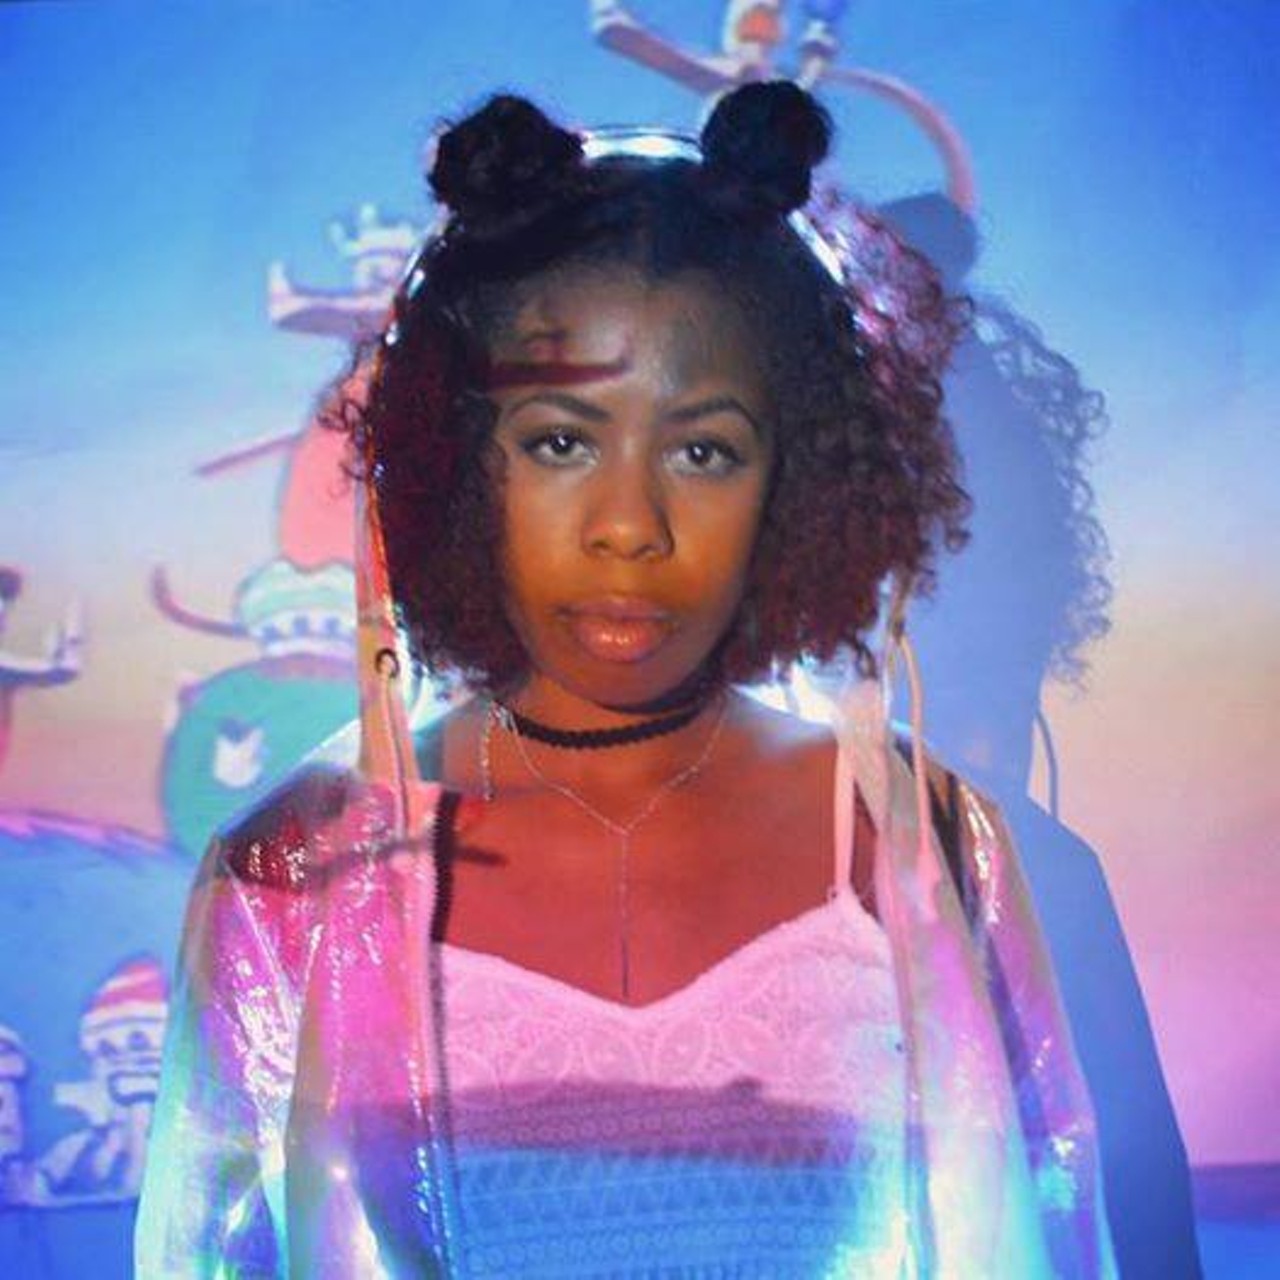 Britney Stoney: Slated at #2 on our list of Best New Bands in 2015, you have plenty of chances to see the neo-soul singer, song writer, and playwright this summer:
June 18 @ MOCAD,
July 16 @ Concert of Colors
July 21 @ Grand Circus Park